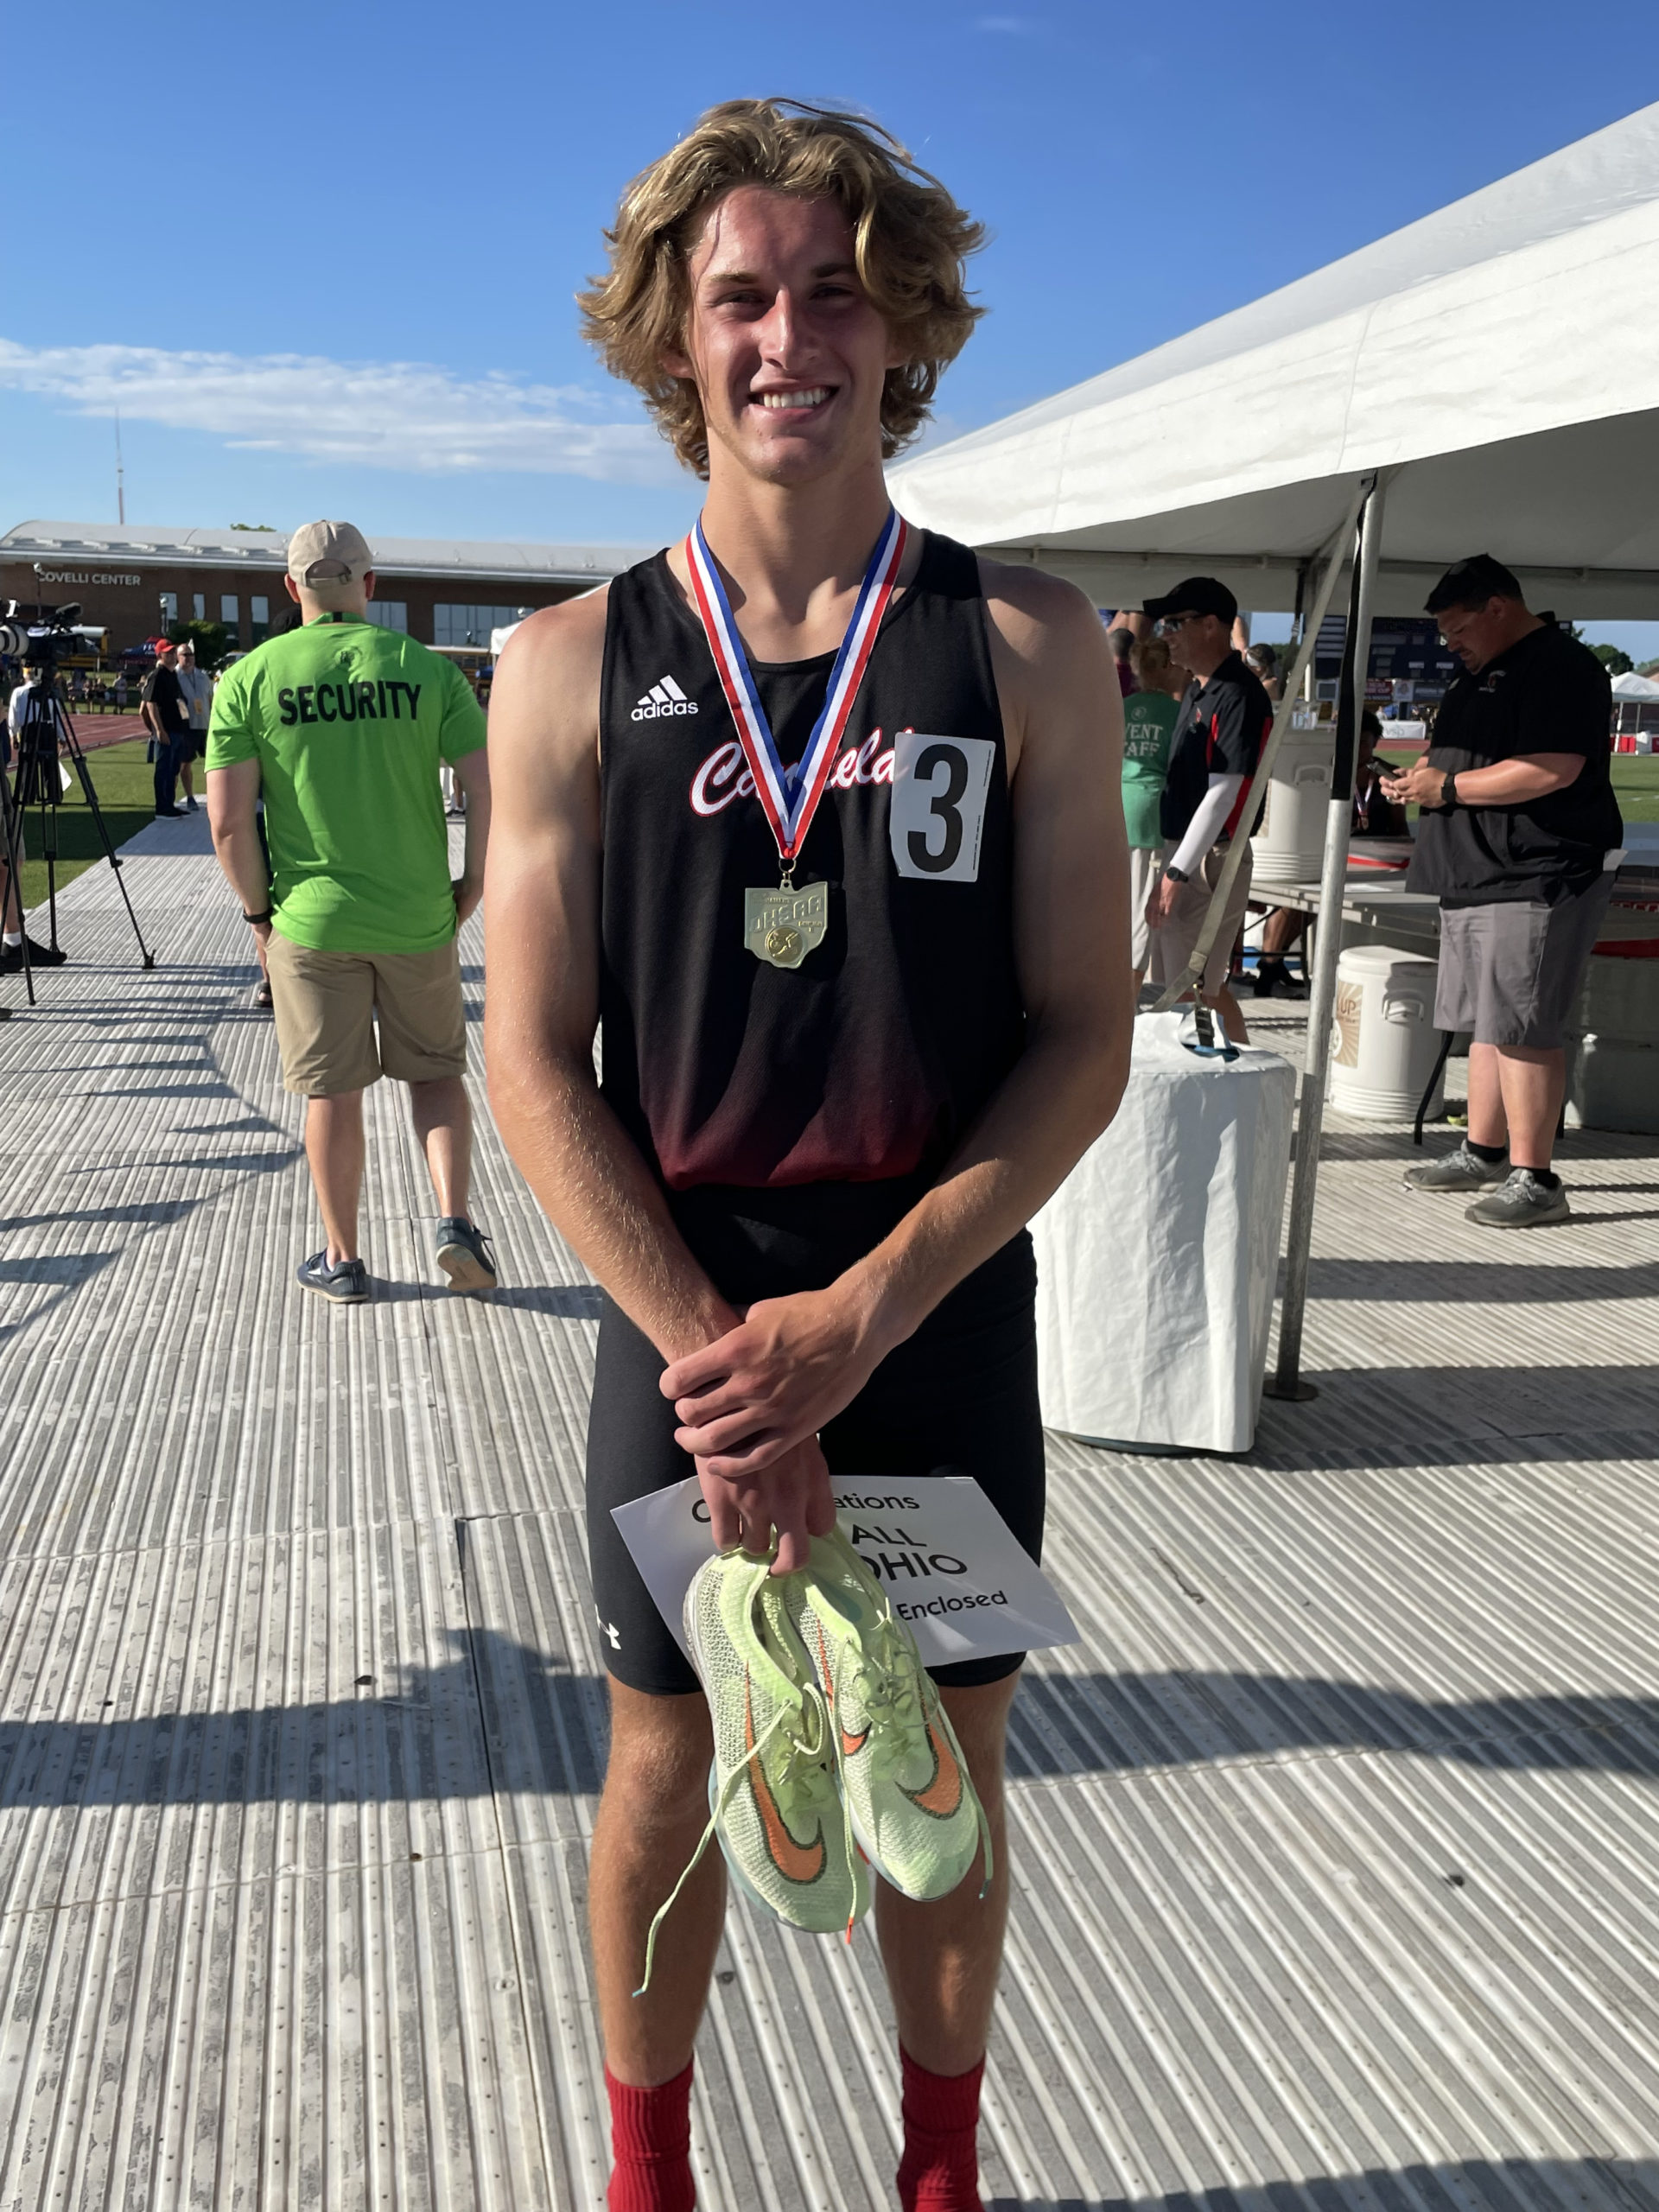 Nick Plant of Canfield Sets New All-Time 800 Meter Run Mark at State Meet